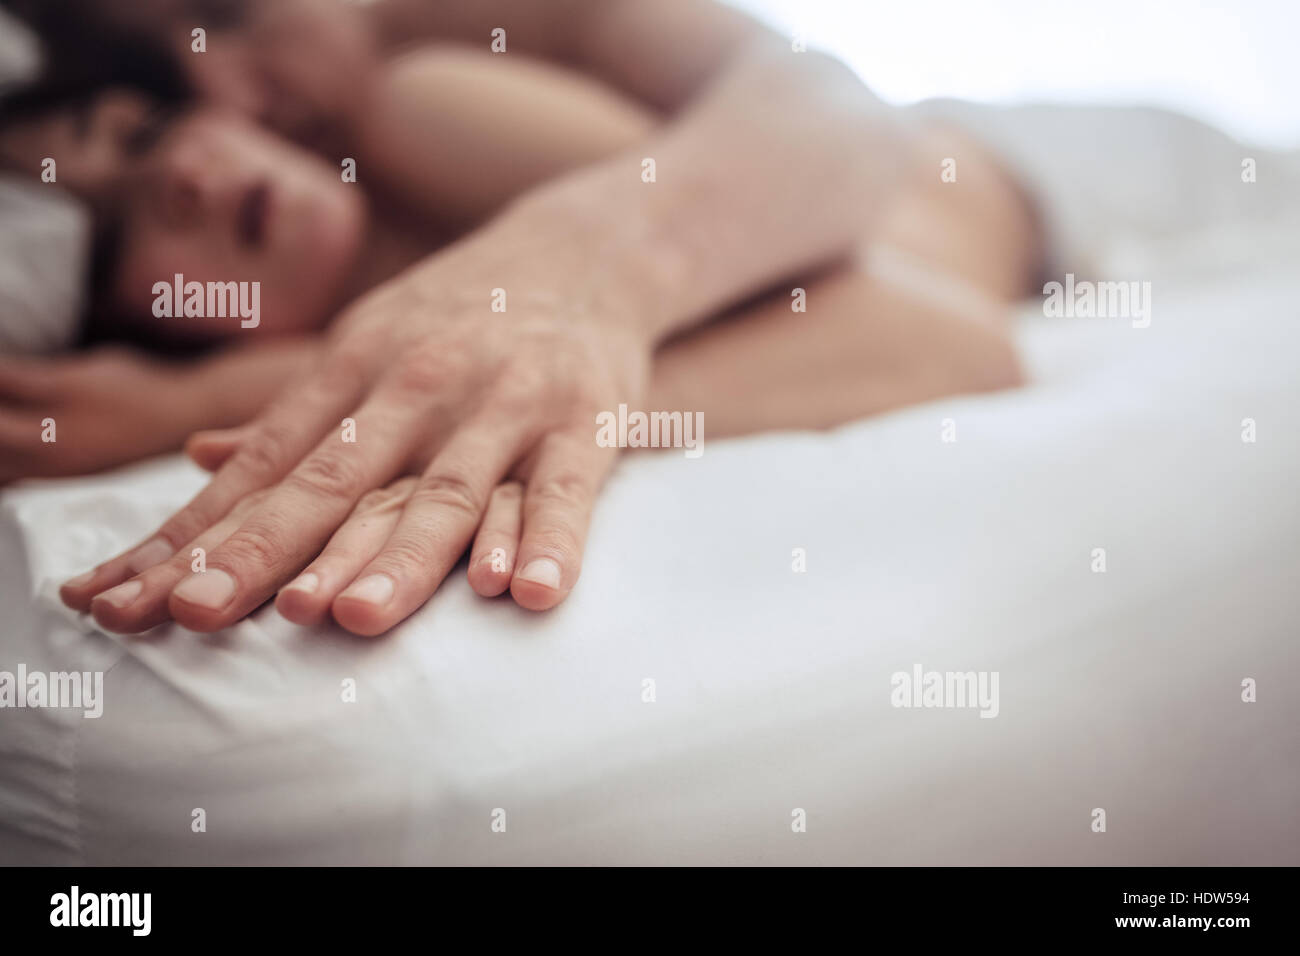 Sensual couple in bed having intimate sex. Focus on hands man and woman. Stock Photo